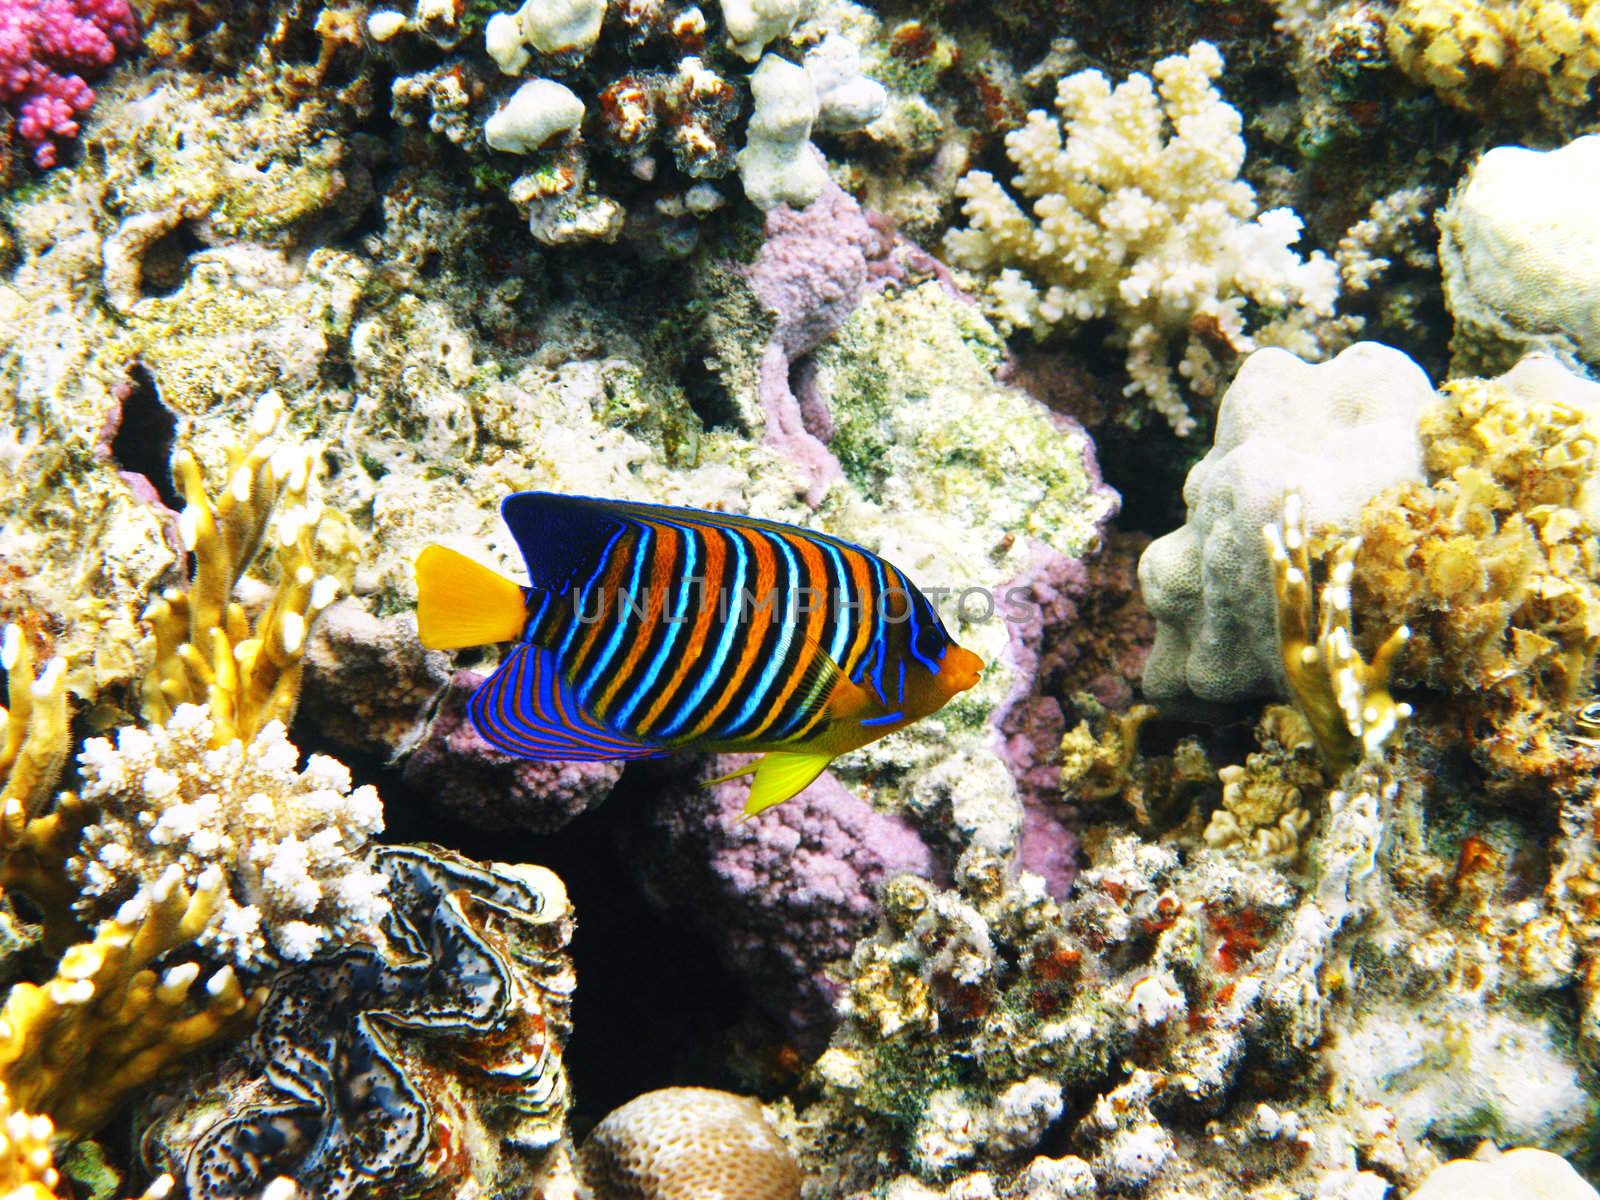 Royal angelfish and coral reef in Red sea